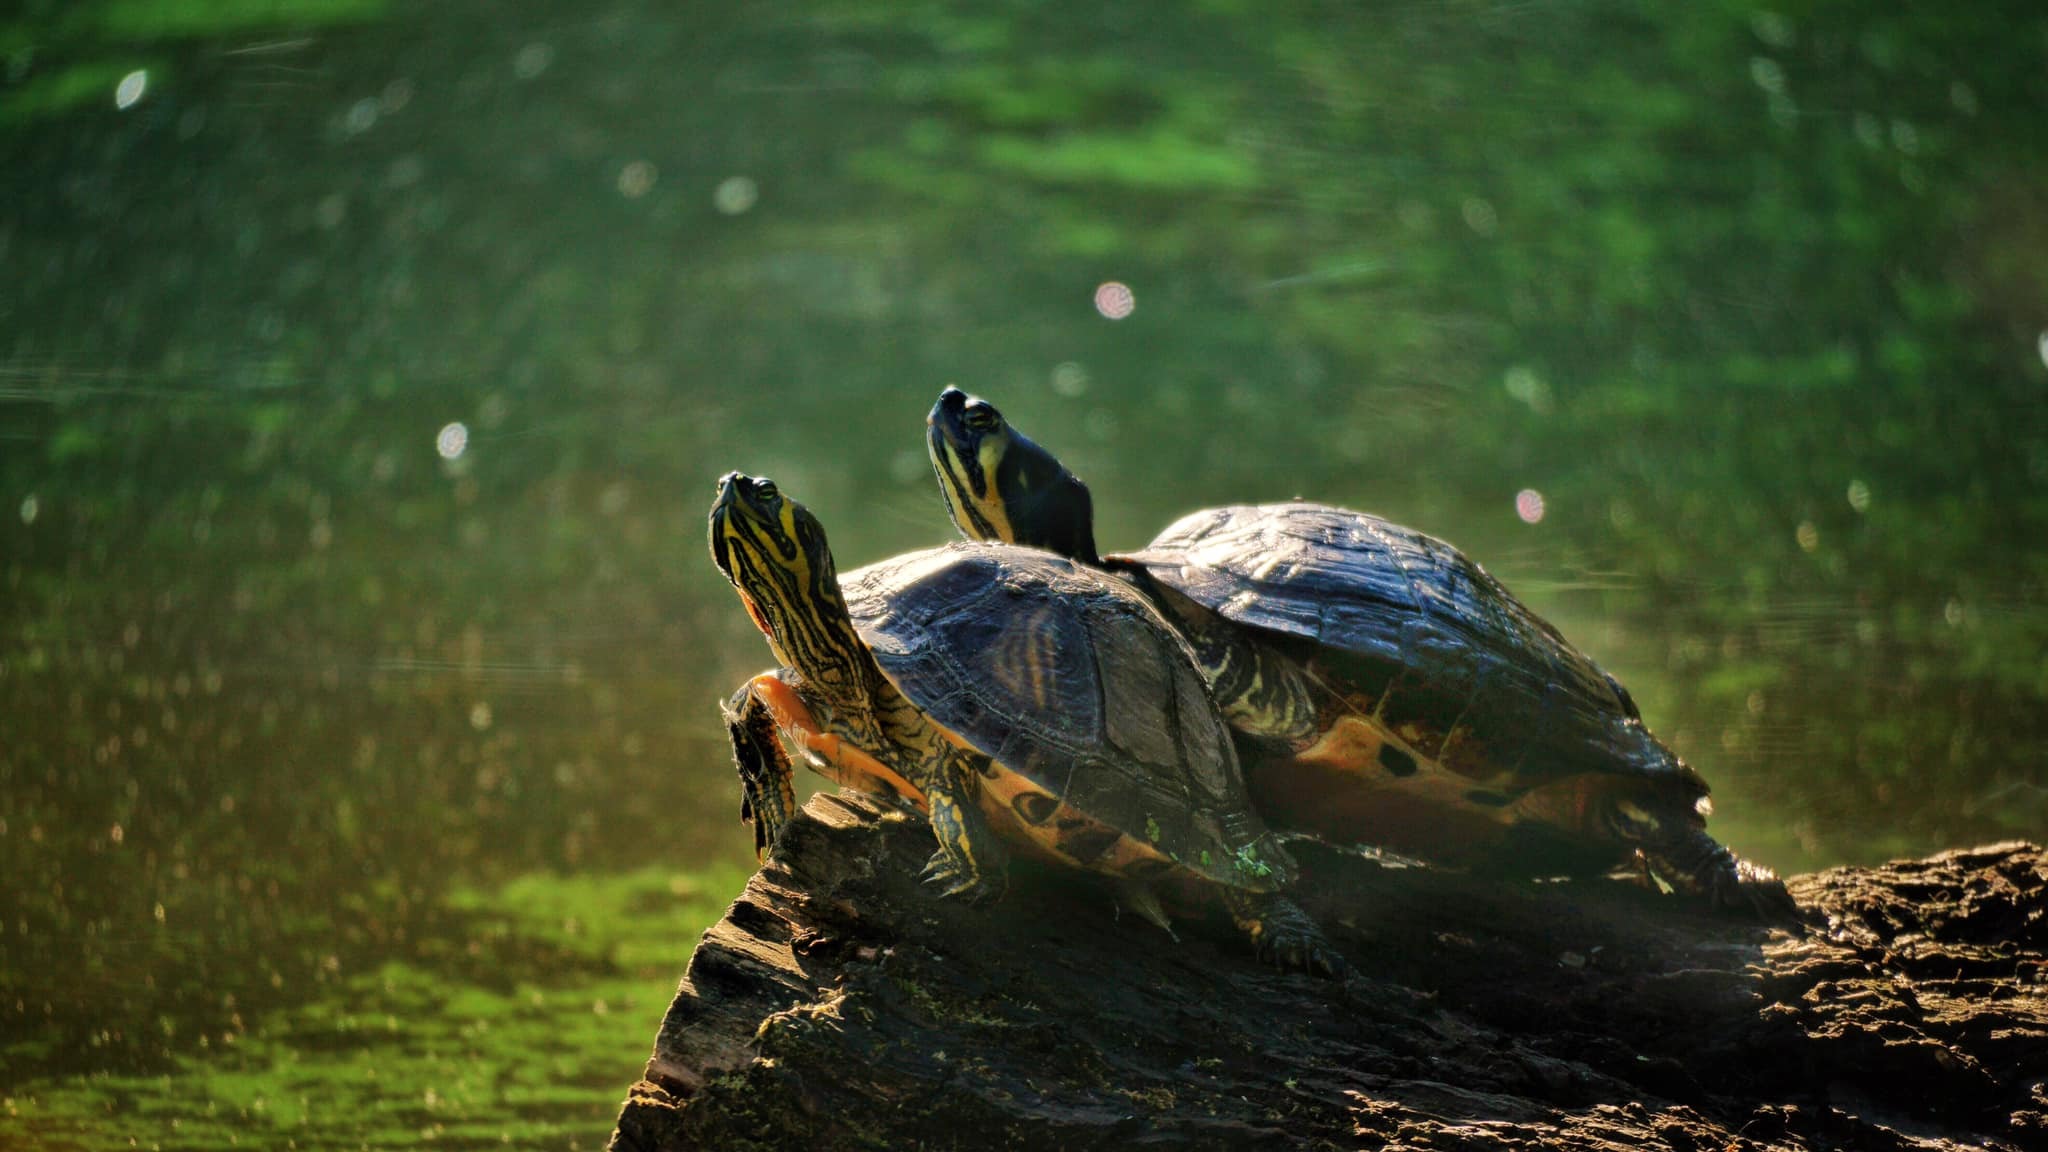 FUN: Two water turtles at Moses Gate Country Park taken by John Norris and then right Gillian McGowan took this photo at Rivington Pike